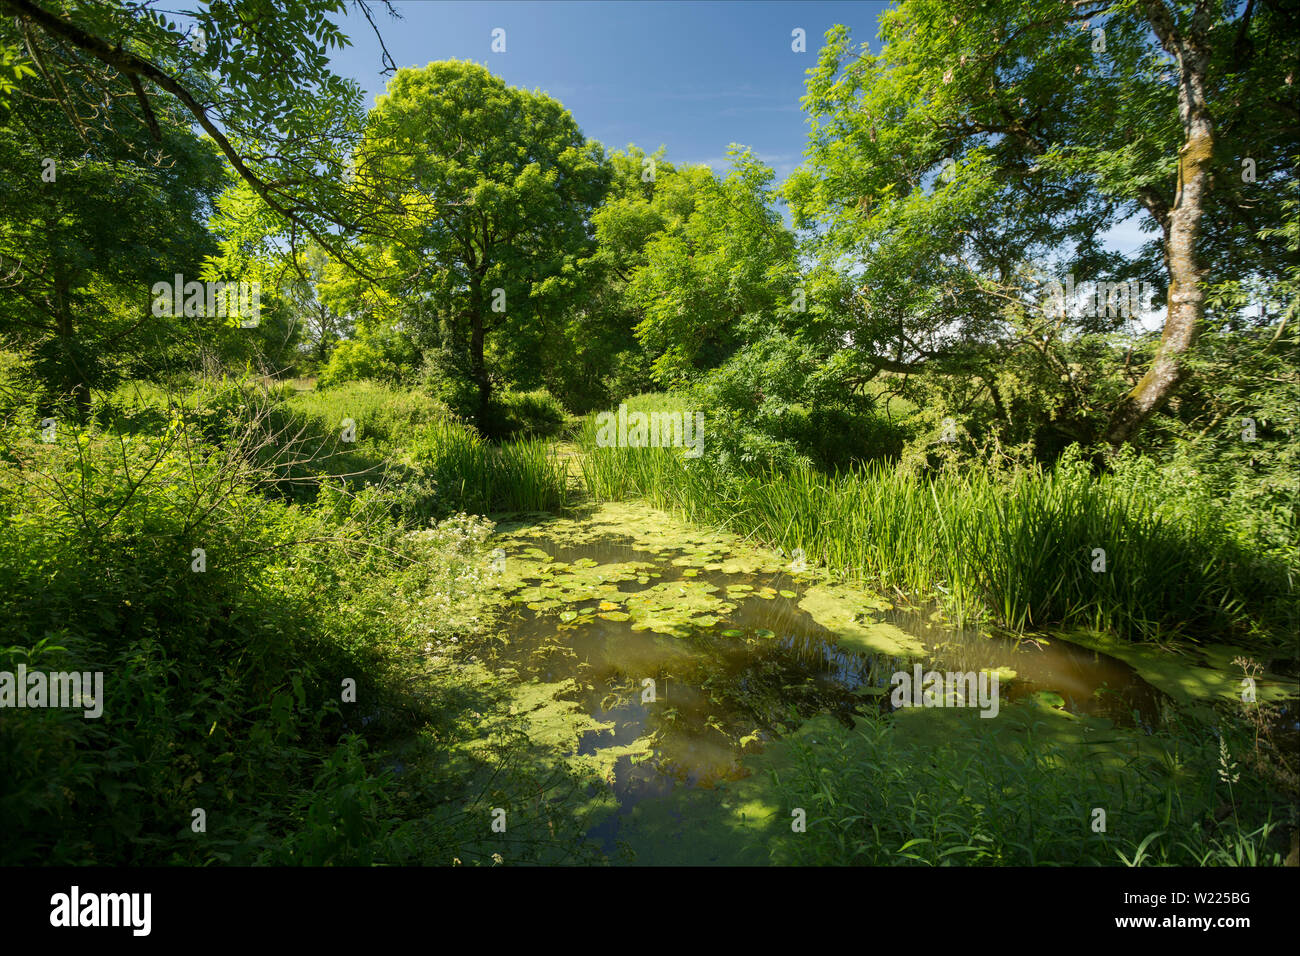 A view upstream of part of the Dorset Stour river above Sturminster Newton Mill in early July showing lush vegetation and lily pads. Dorset England UK Stock Photo